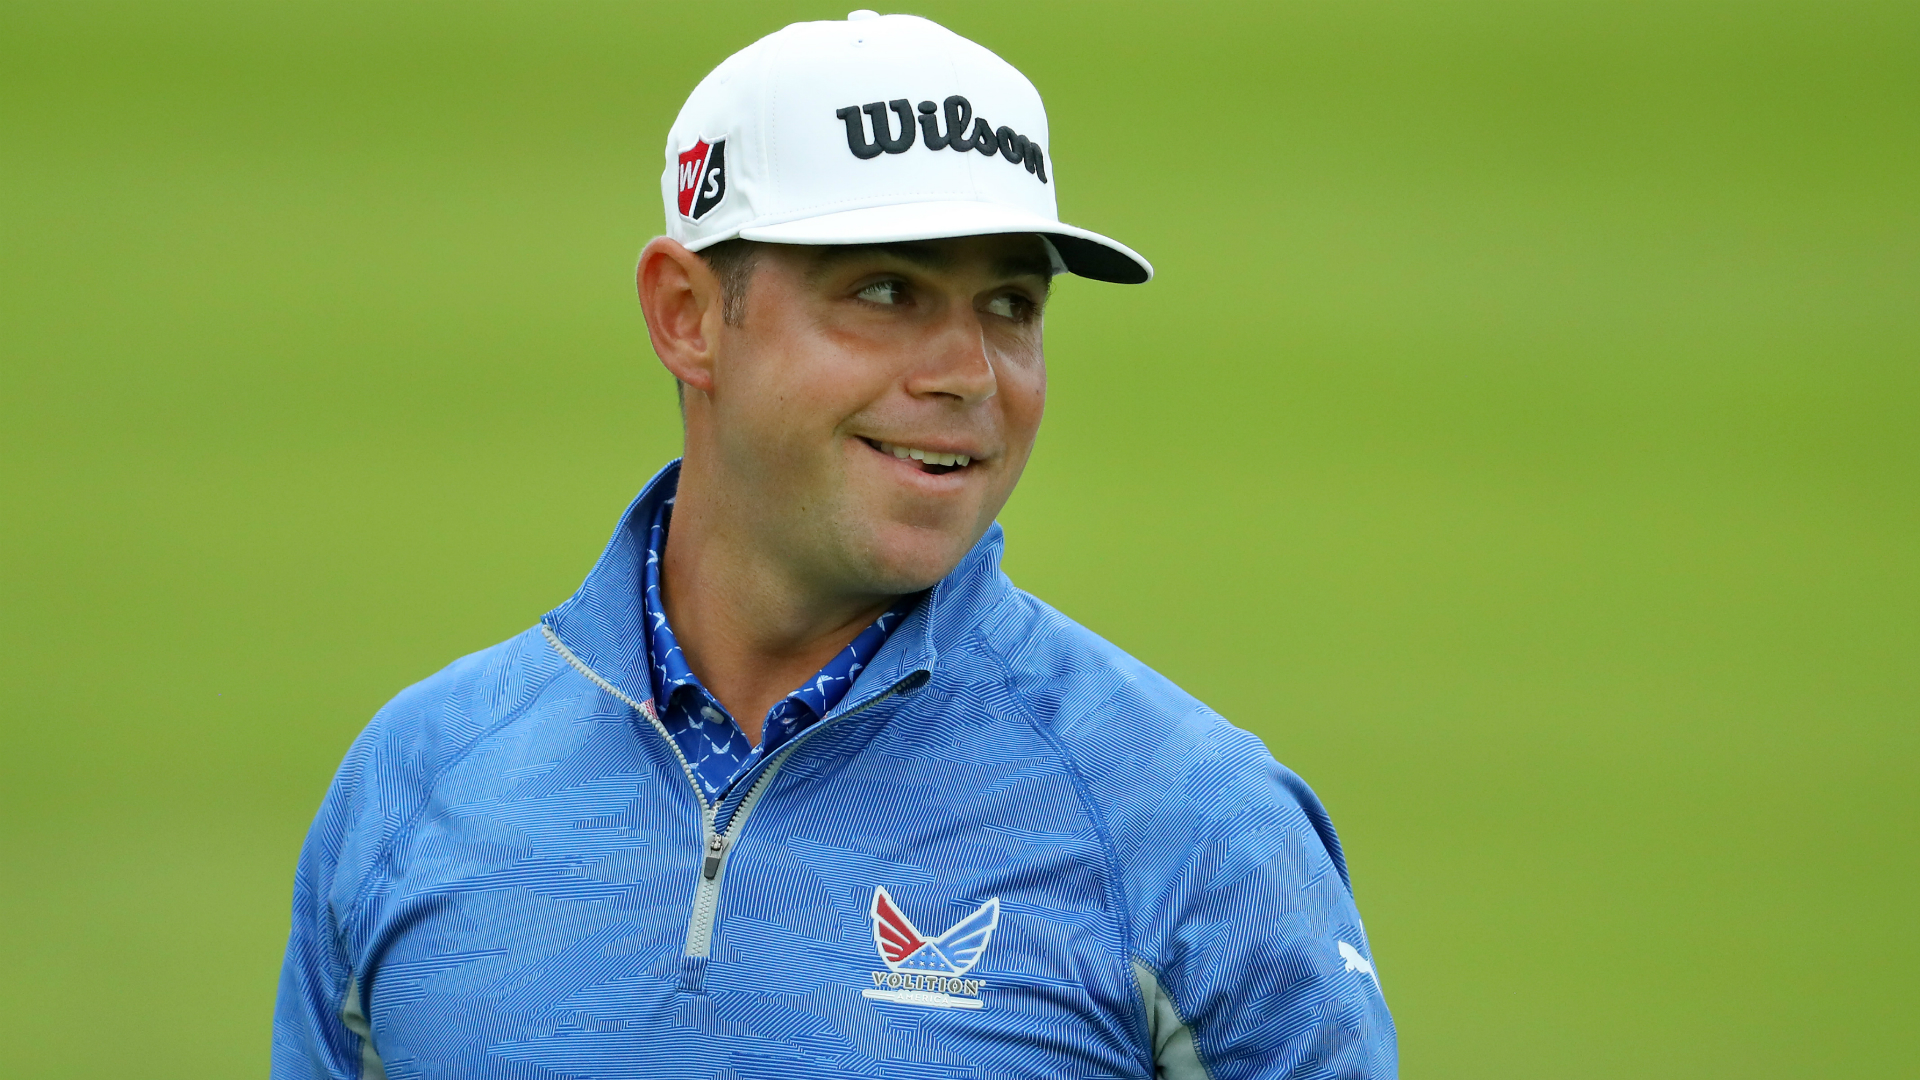 Gary Woodland wins maiden major with US Open victory at Pebble Beach